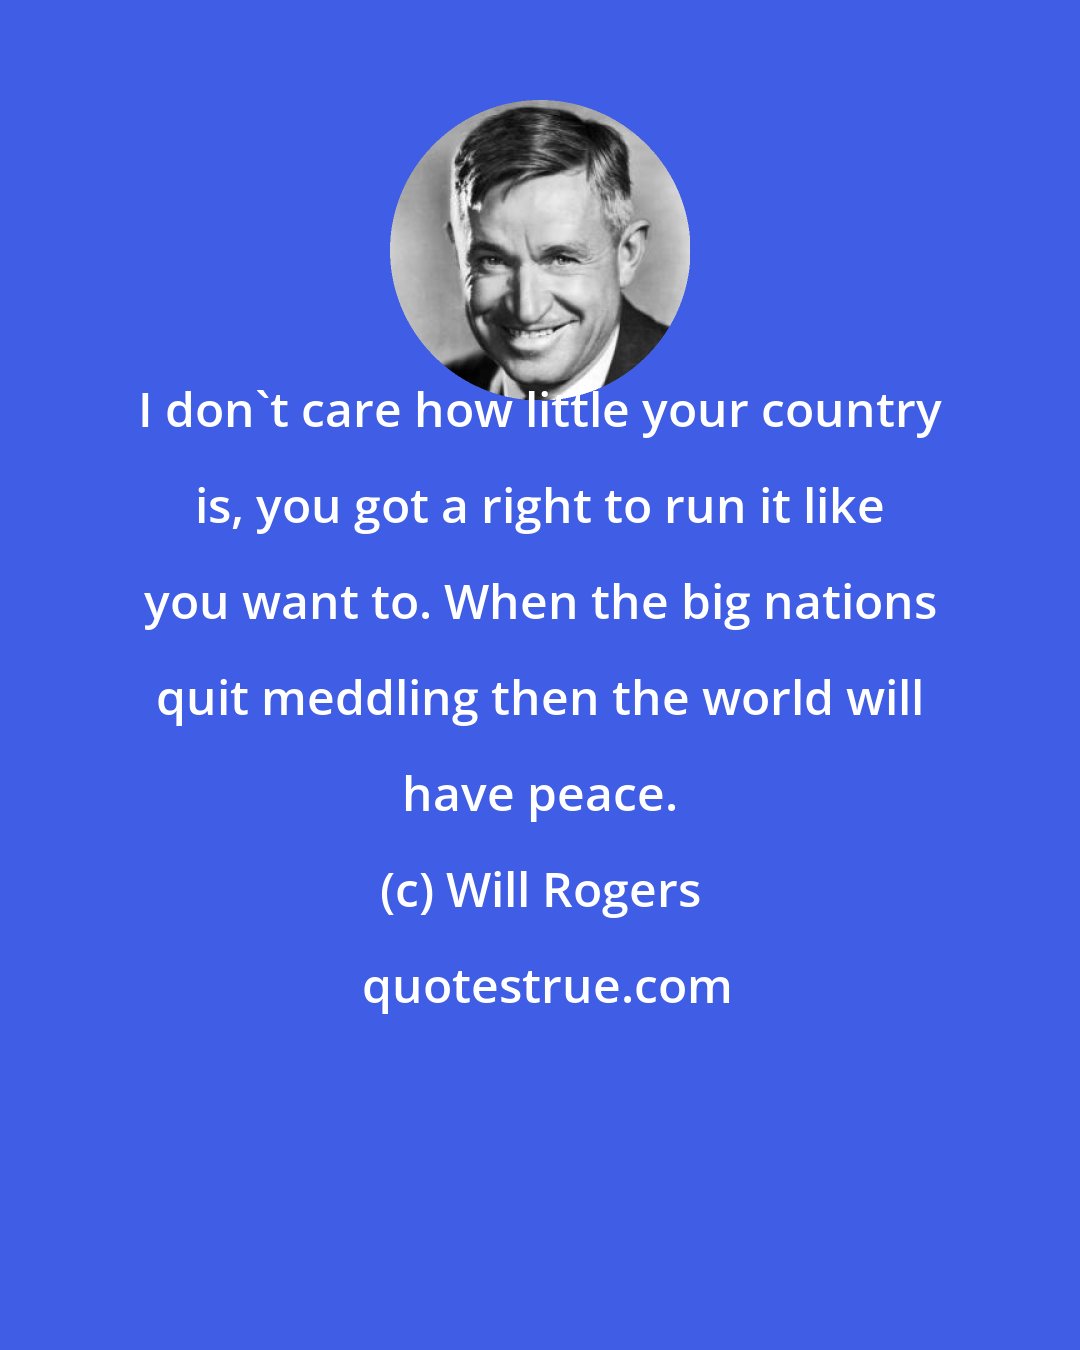 Will Rogers: I don't care how little your country is, you got a right to run it like you want to. When the big nations quit meddling then the world will have peace.